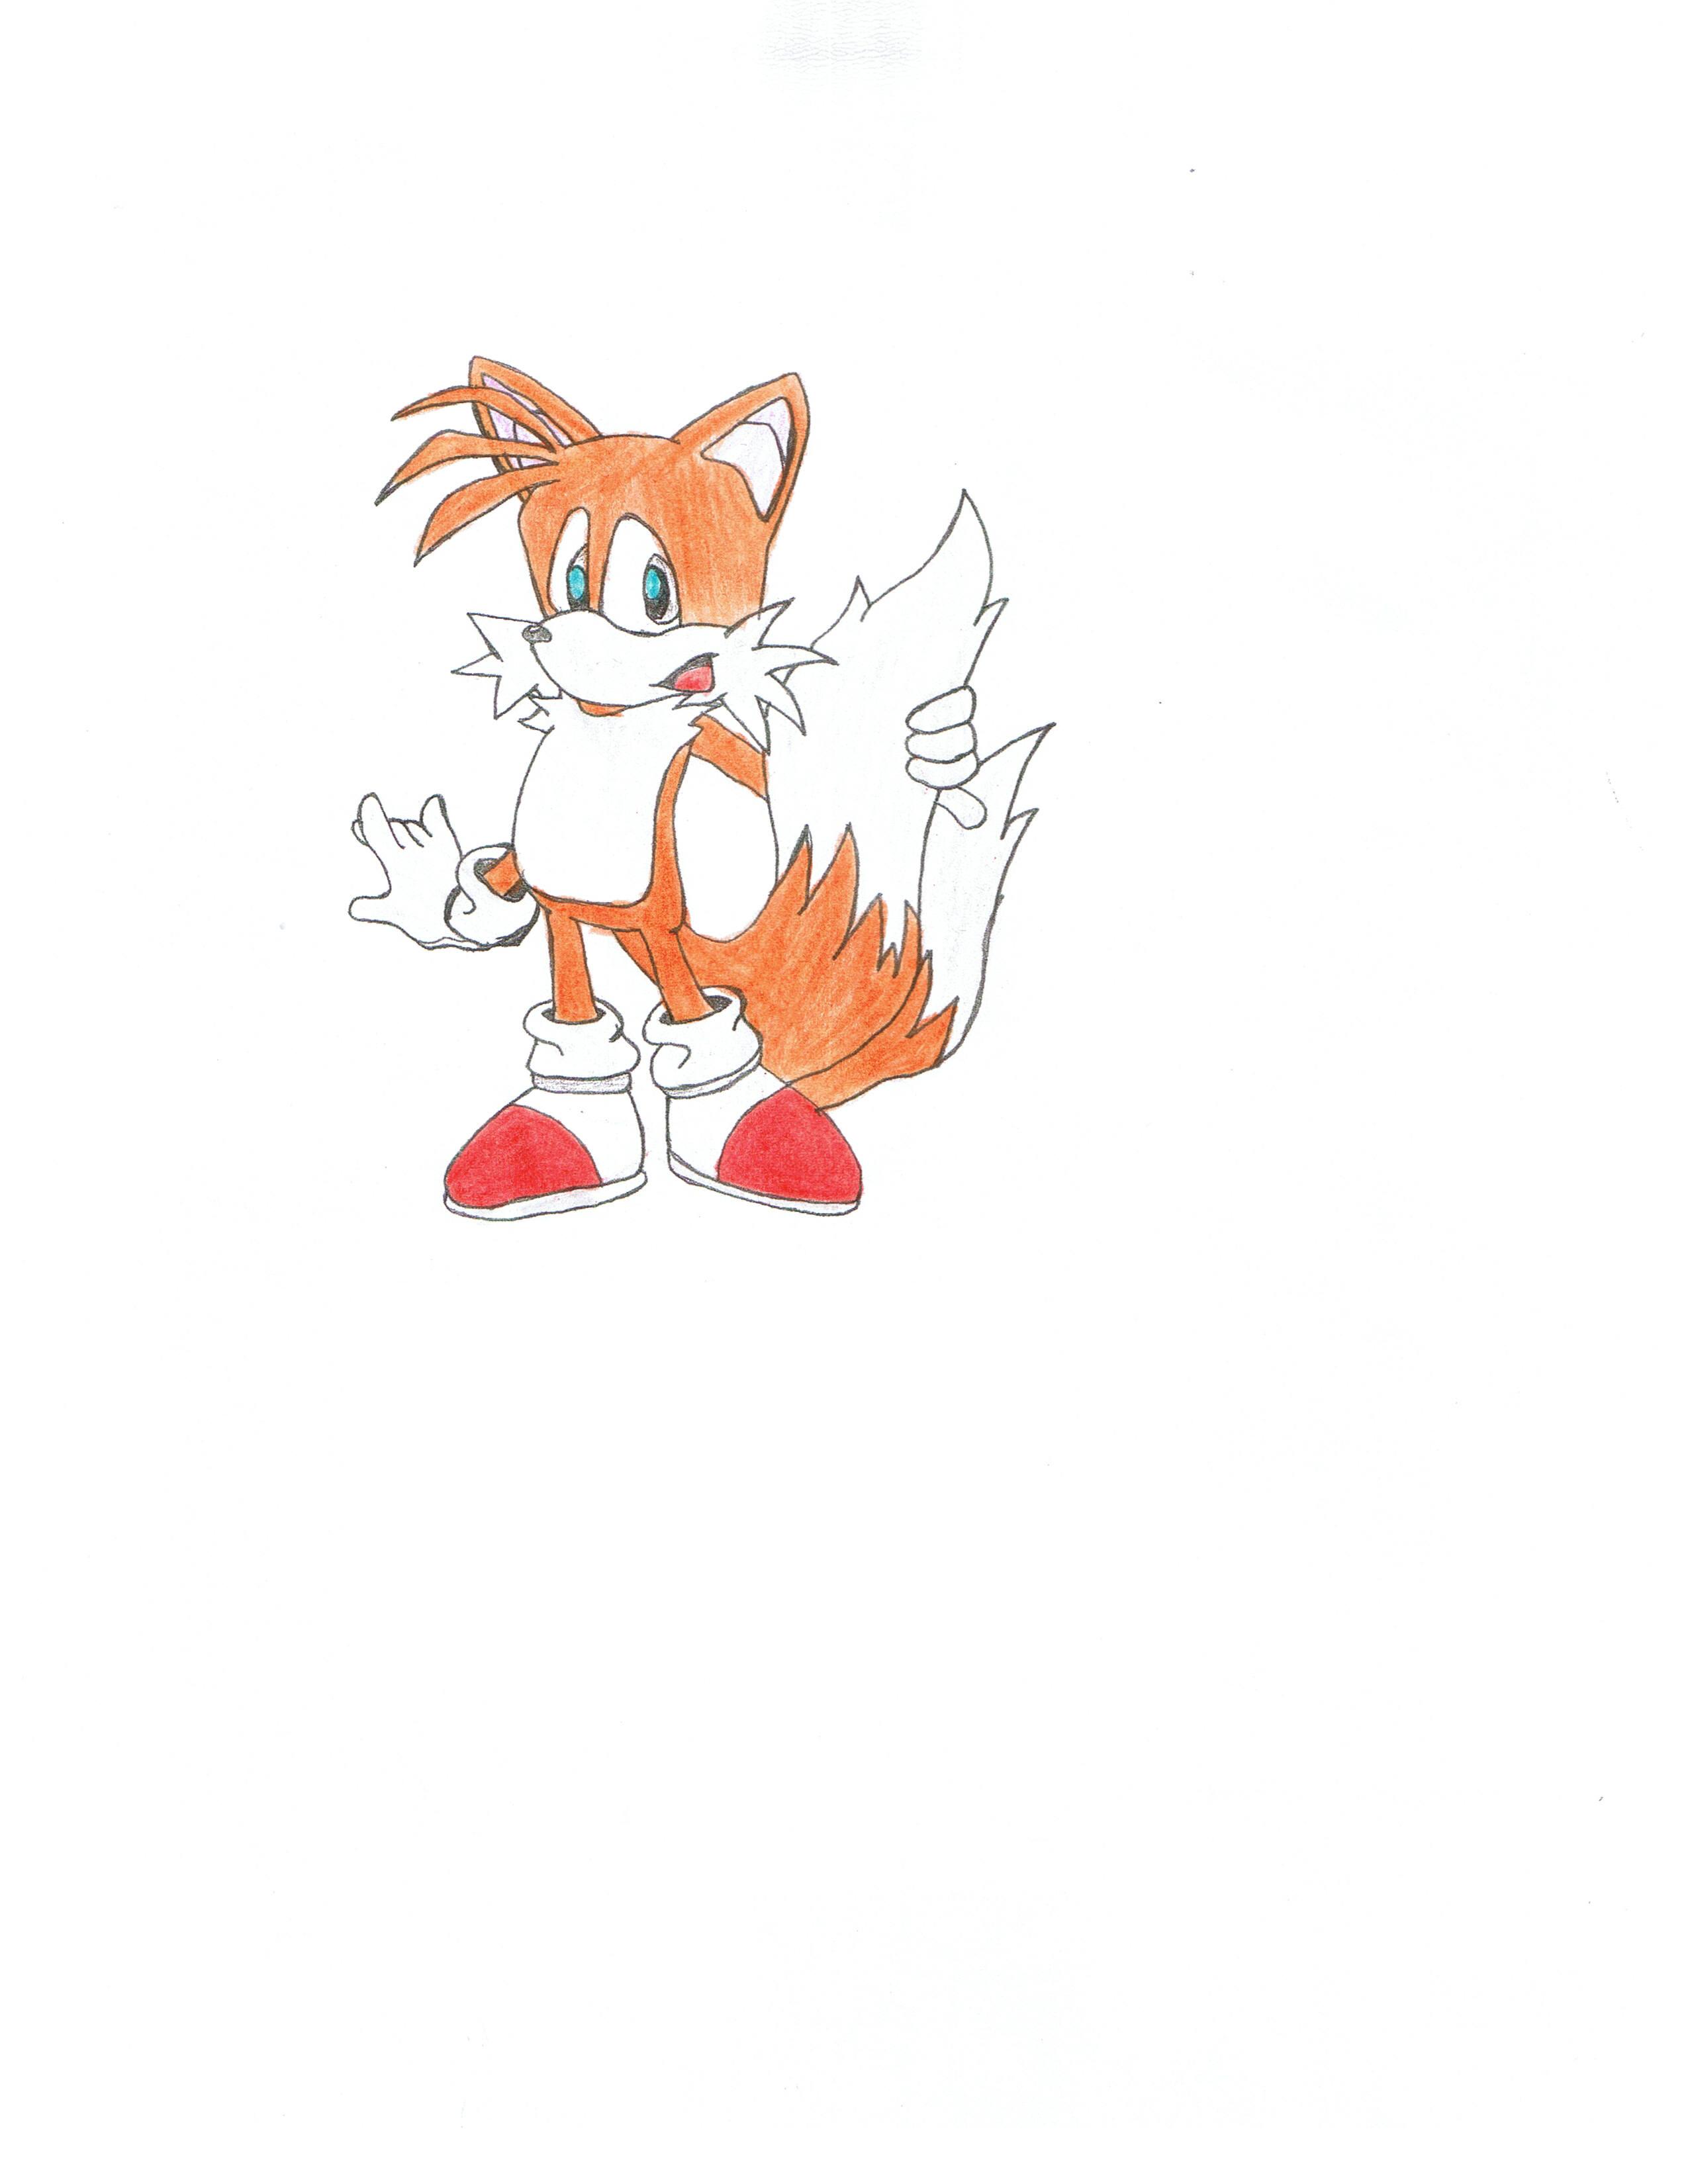 Miles"Tails"prower by kh2_SORA_kidd63